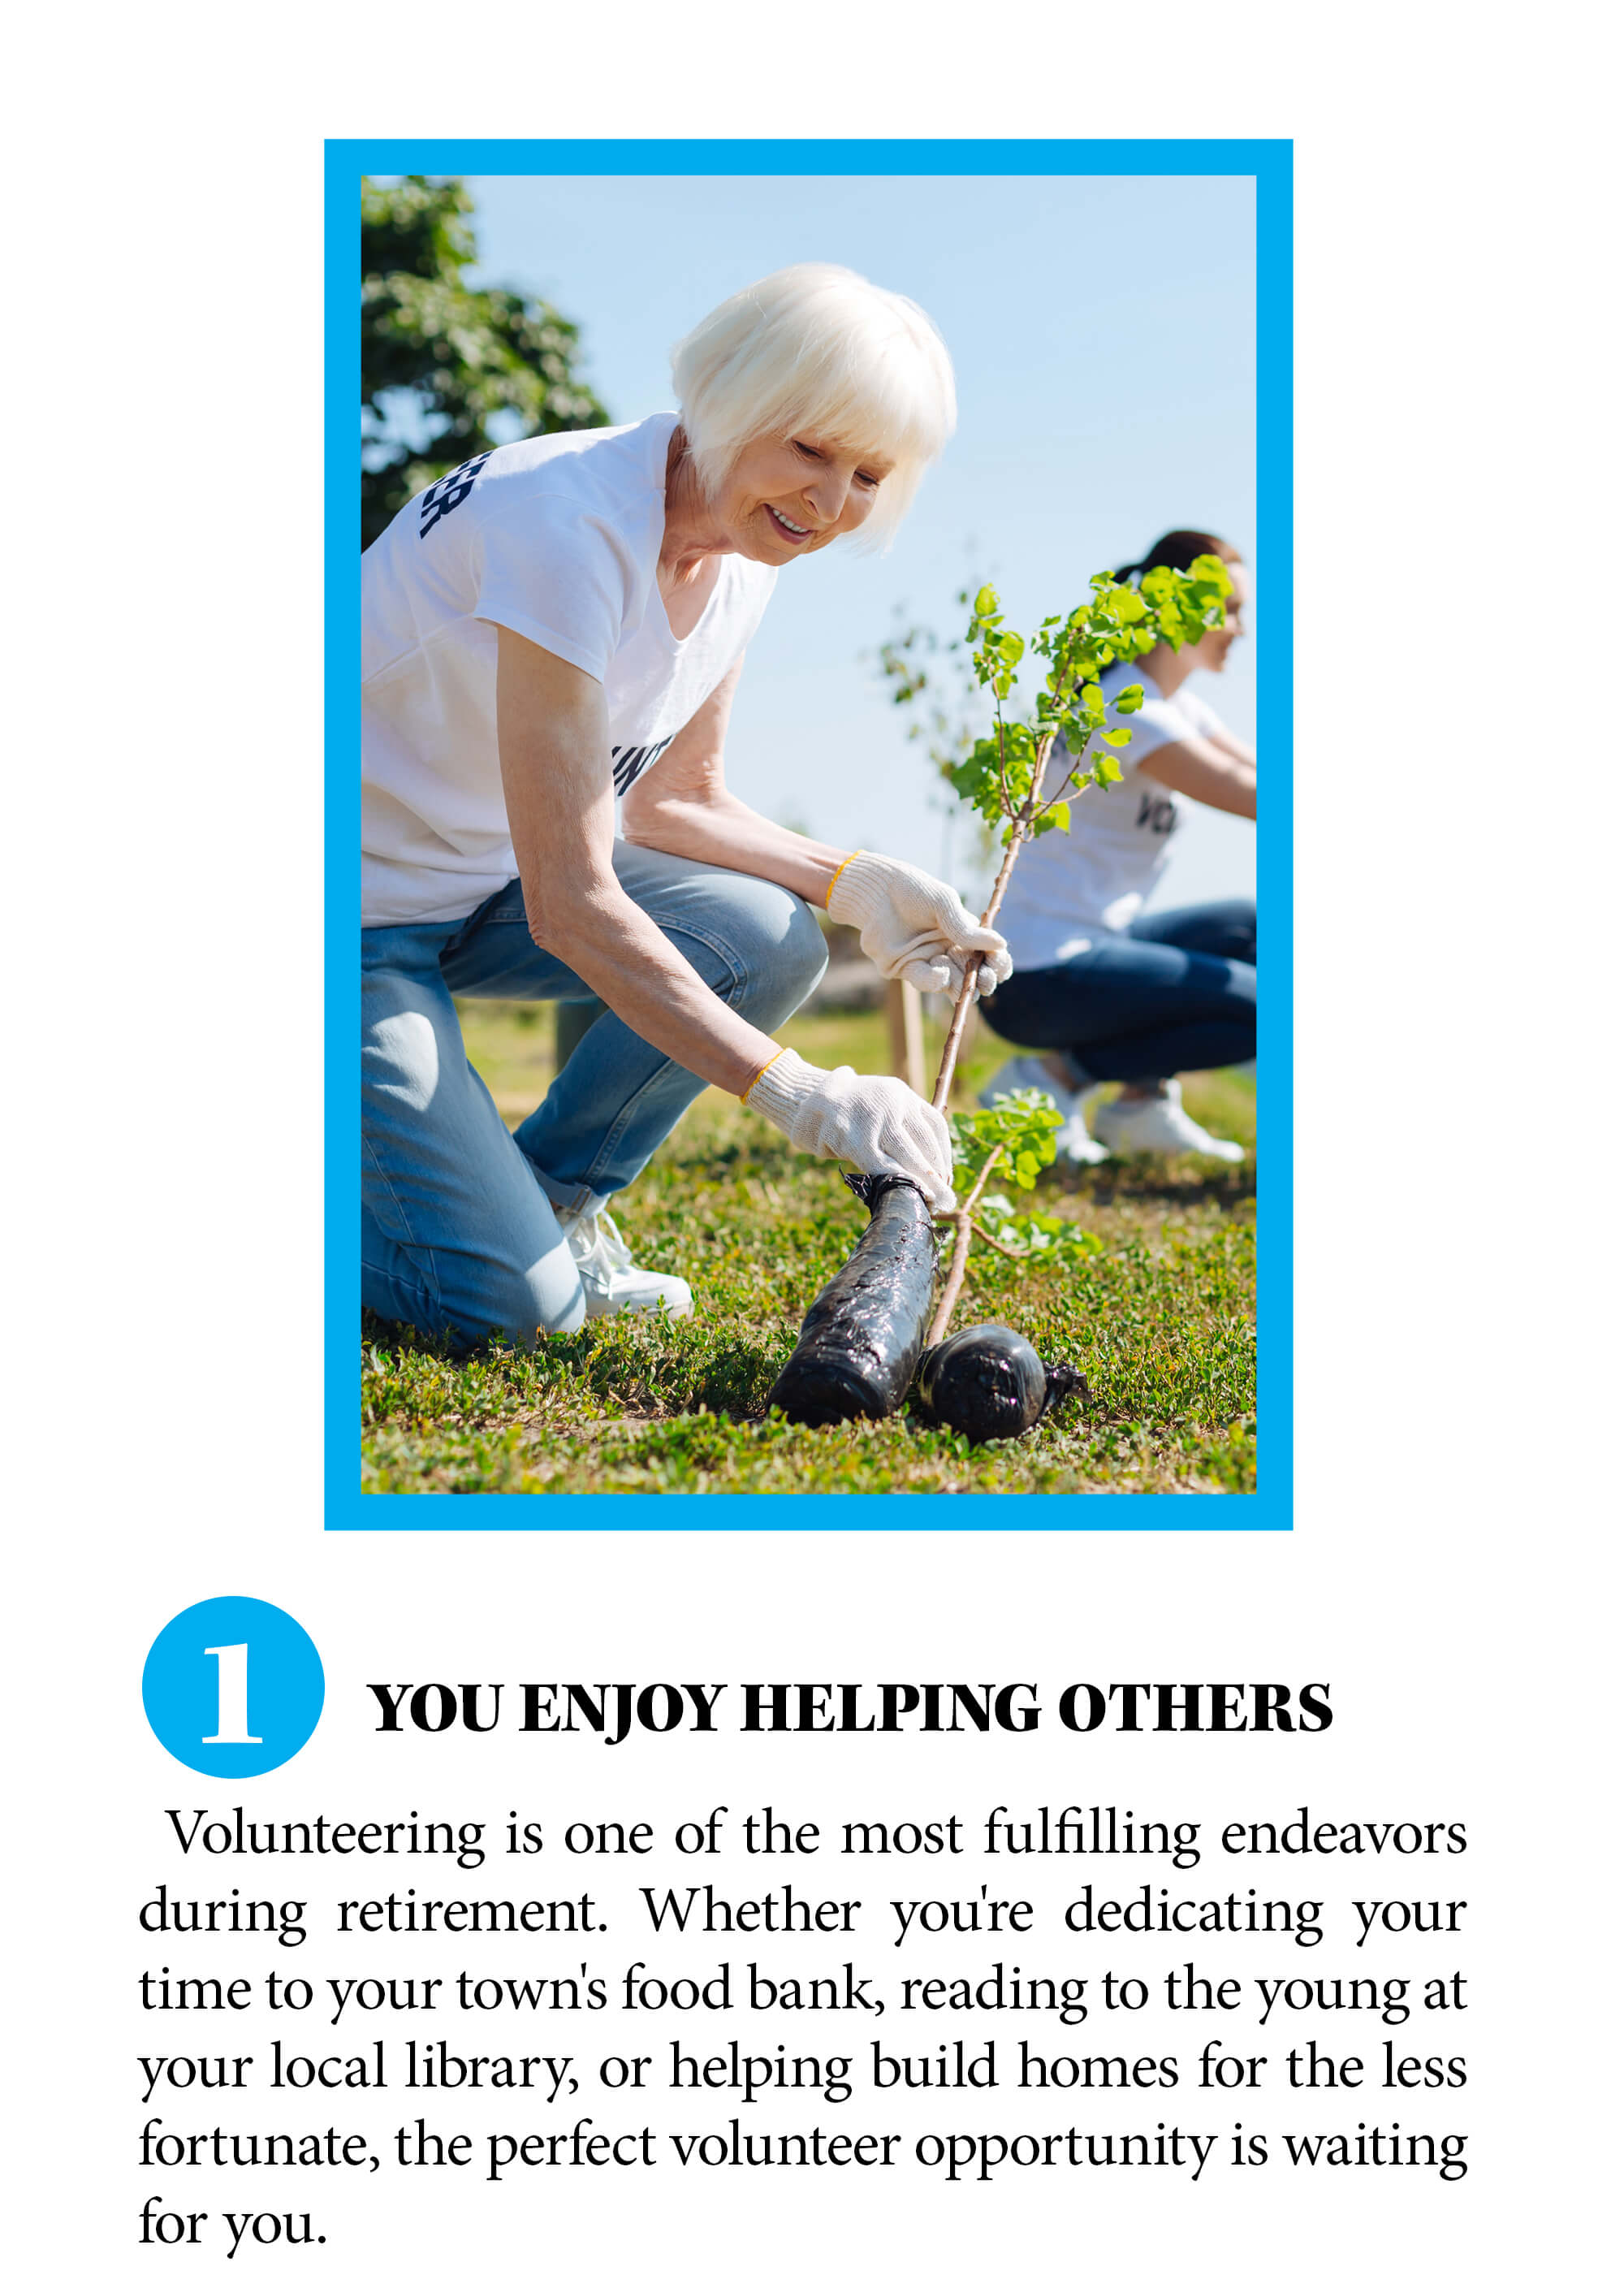 You enjoy helping others. Volunteering is one of the most fulfilling endeavors during retirement. Whether you're dedicating your time to your town's food bank, reading to the young at your local library, or helping build homes for the less fortunate, the perfect volunteer opportunity is waiting for you.